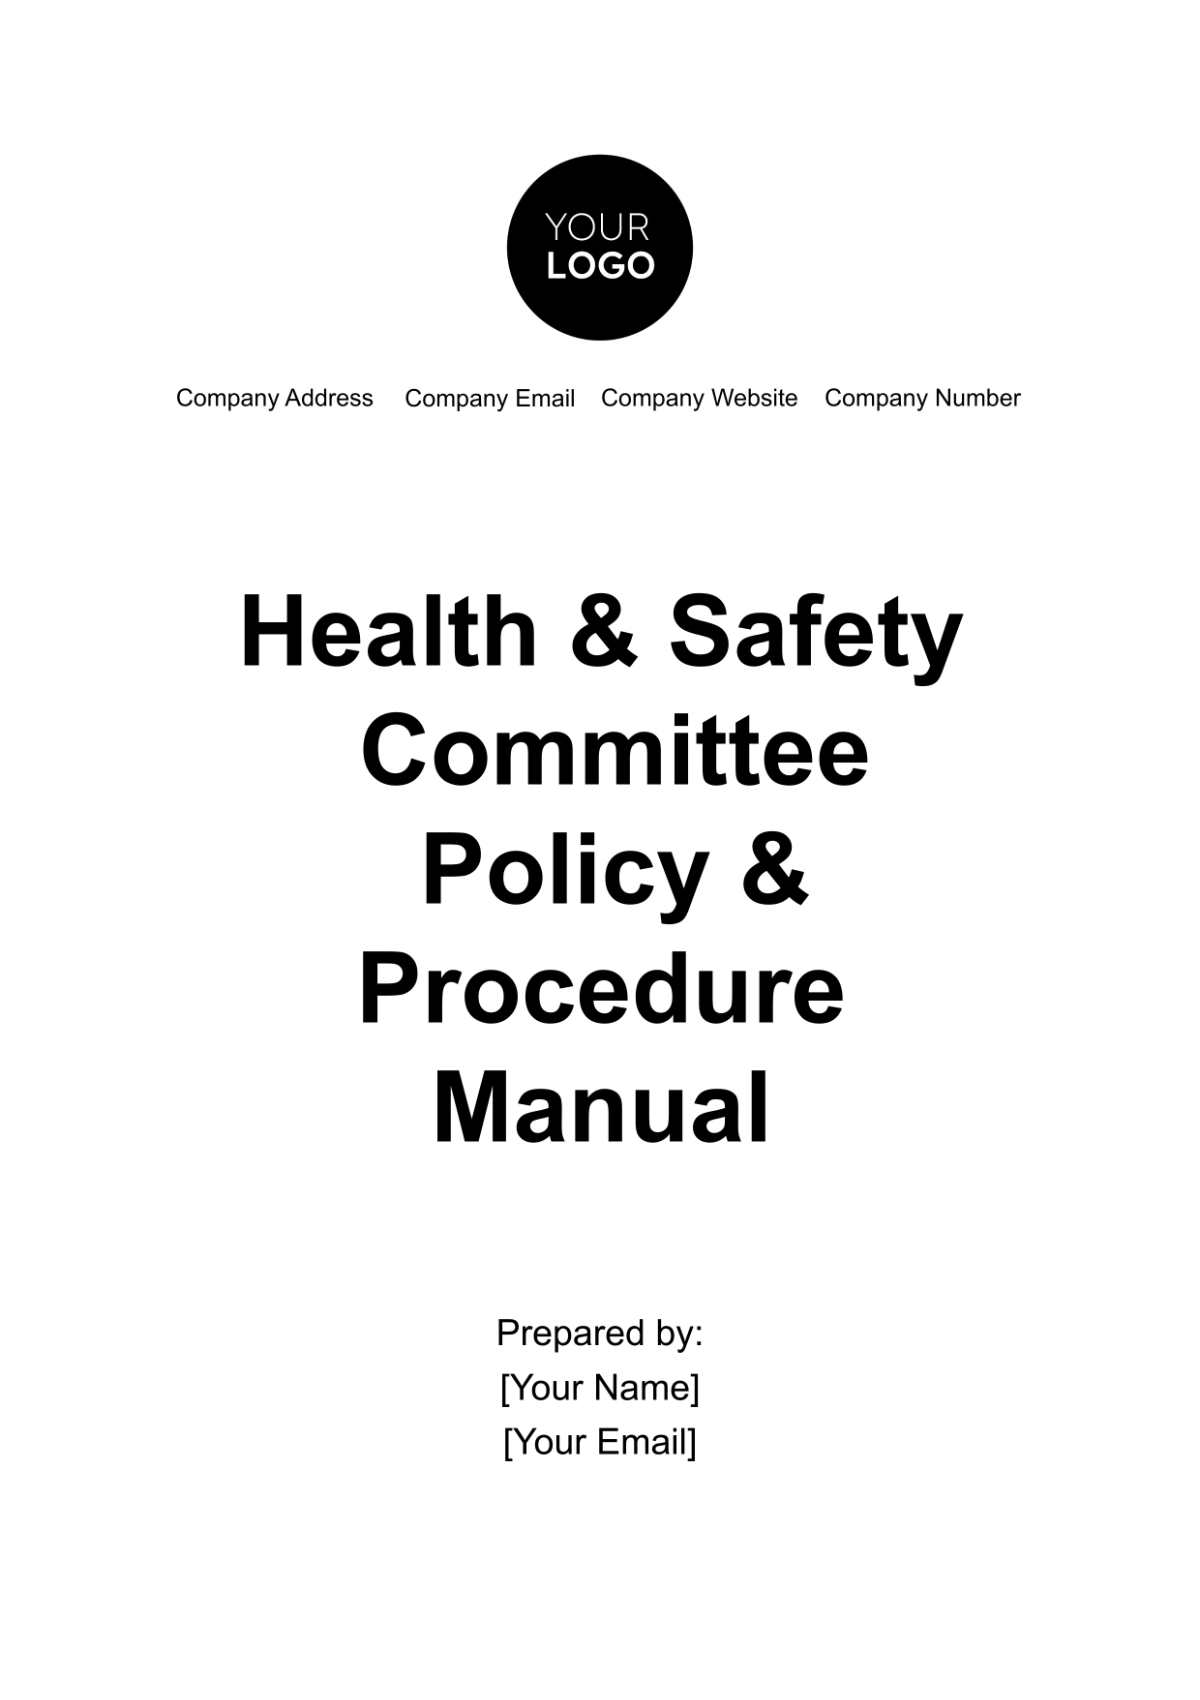 Health & Safety Committee Policy & Procedure Manual Template